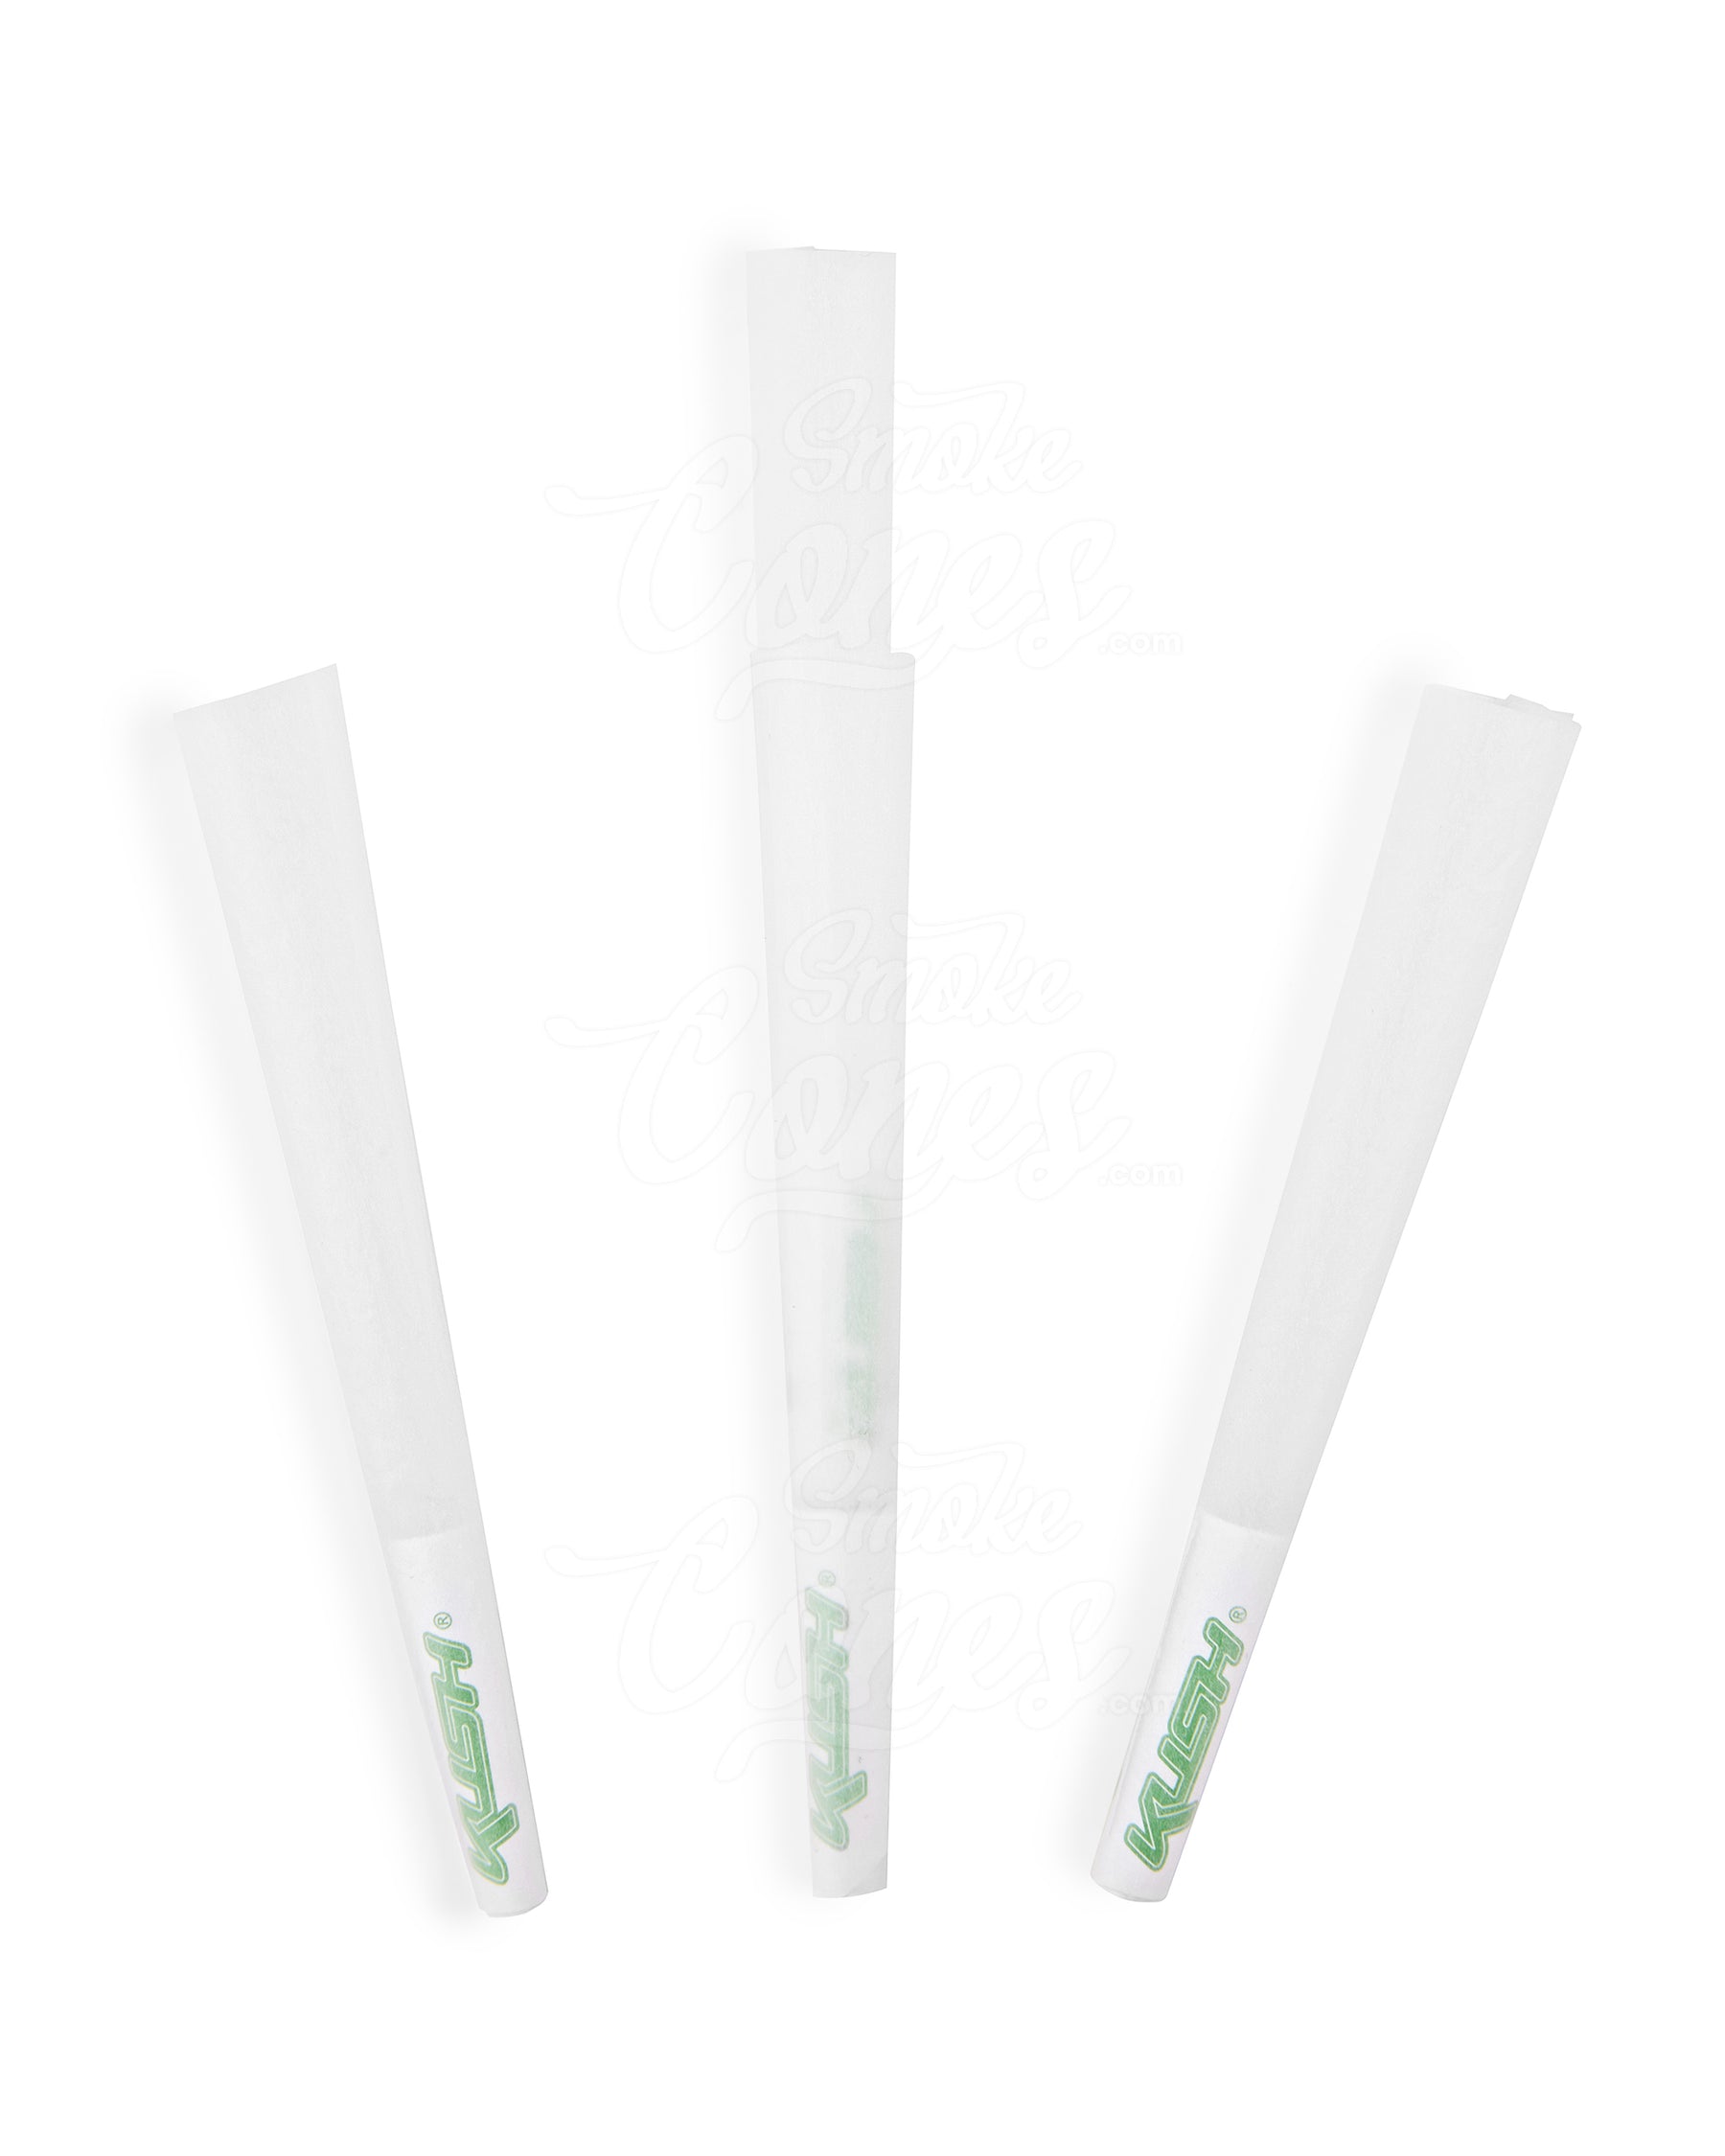 Kush 1 1-4 Size Ultra Thin Pre Rolled Cones w/ Filter Tip 900/Box - 4